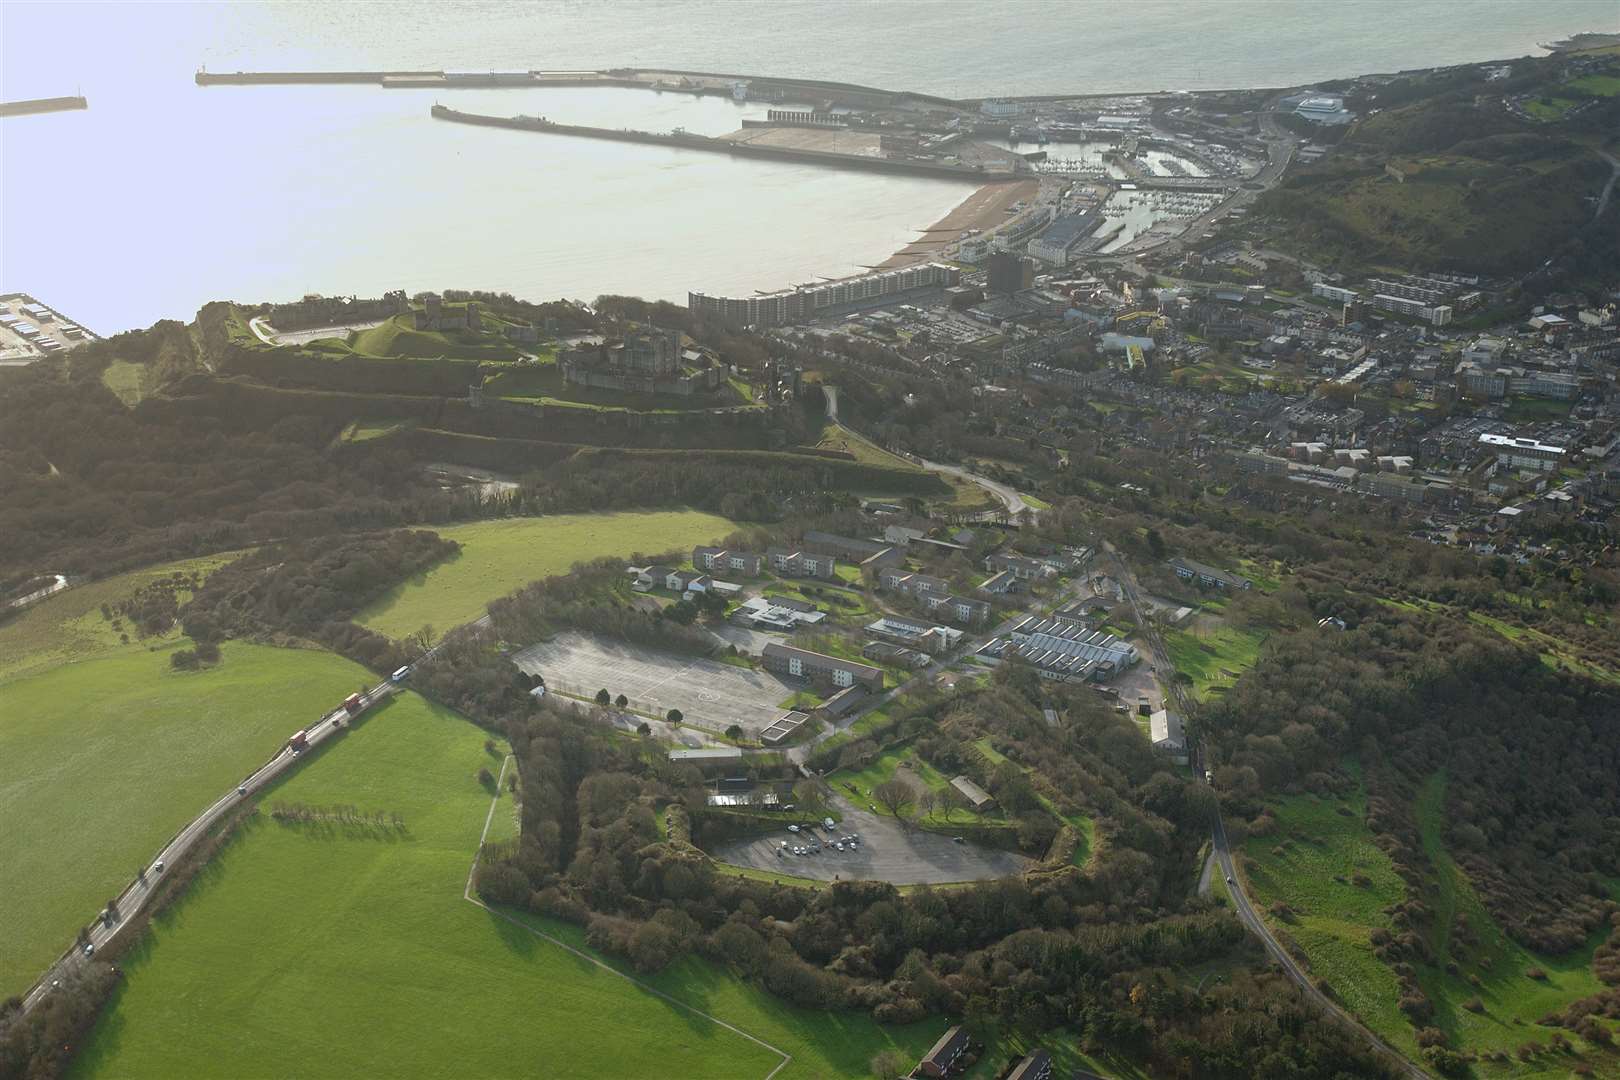 Up to 500 homes will be built on the former Connaught Barracks site